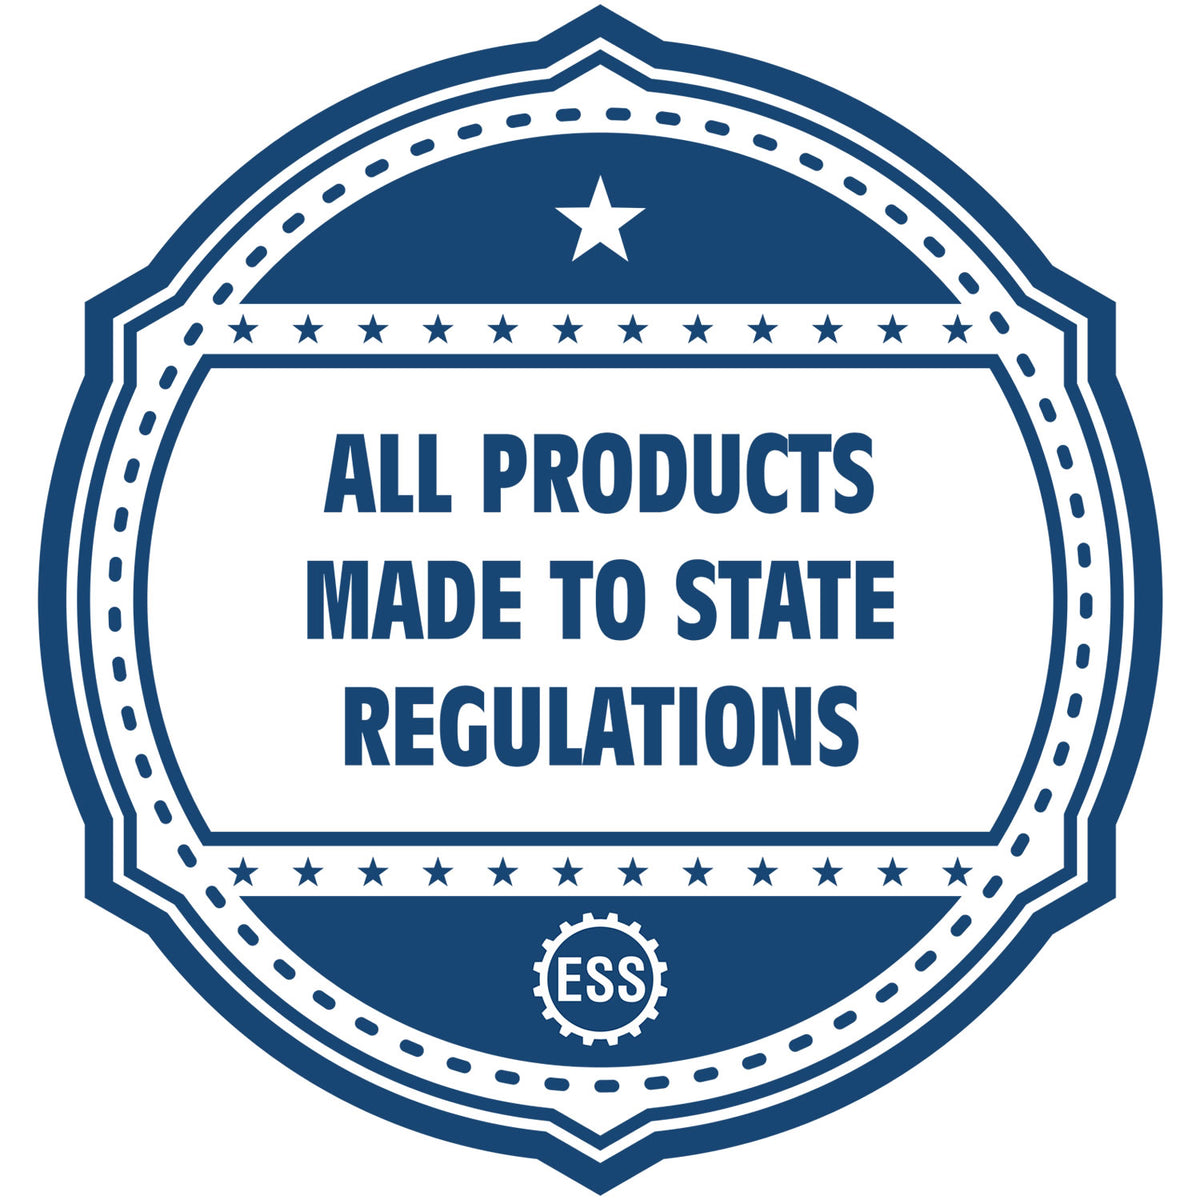 A blue icon or badge for the Gift Alabama Engineer Seal showing that this product is made in compliance with state regulations.